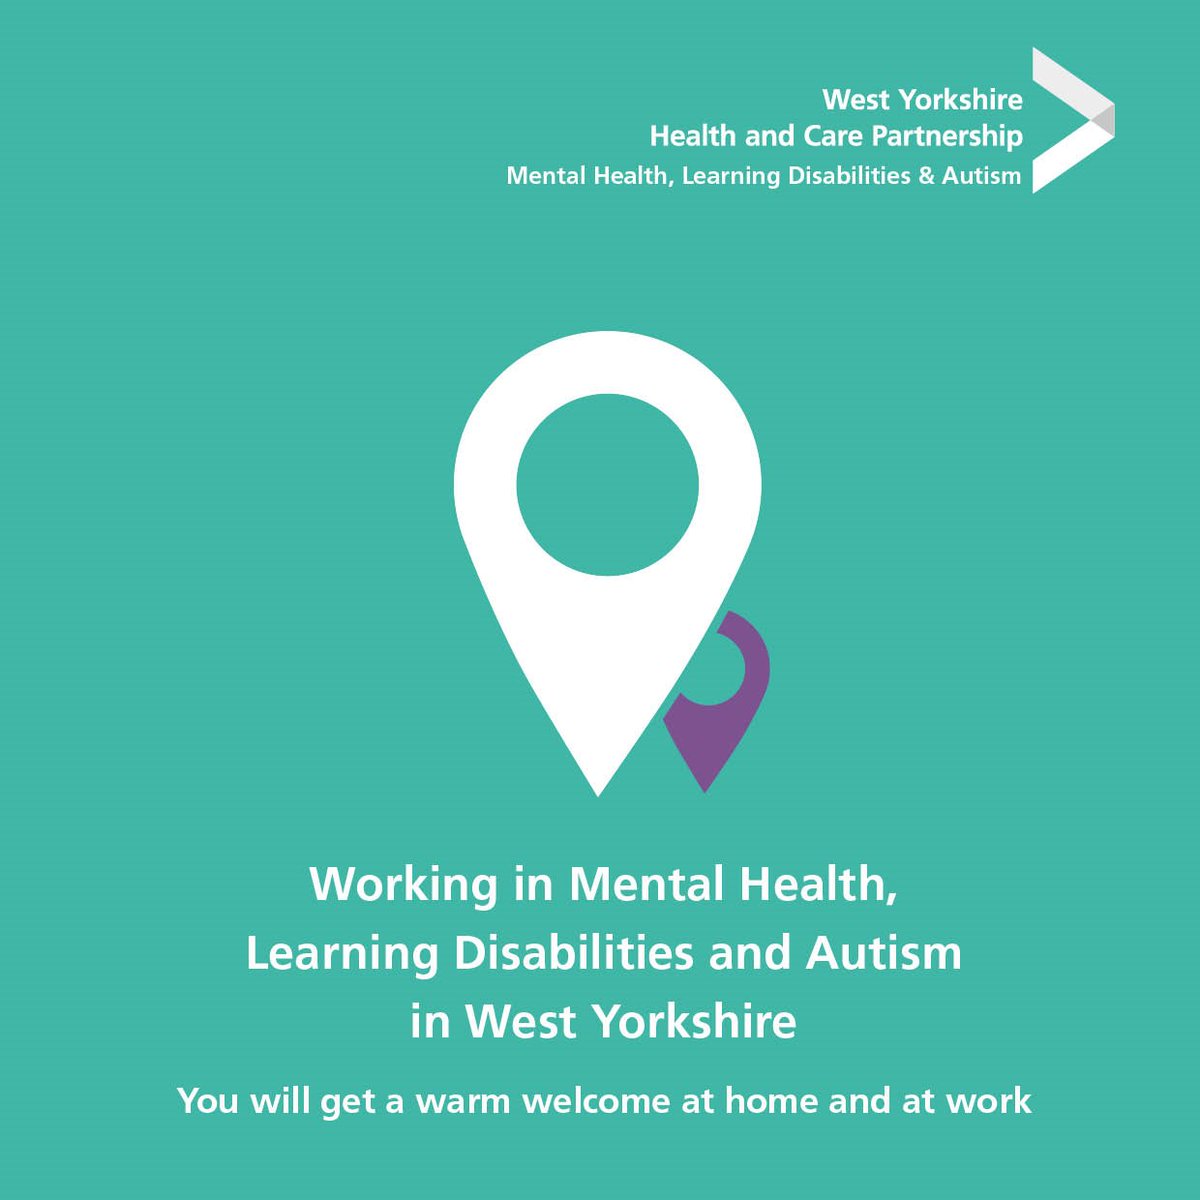 Is it #TimeToTalk about a new career in Mental Health, Learning Disabilities and Autism? Read and download our new brochure to find out more: bit.ly/3XILbU0